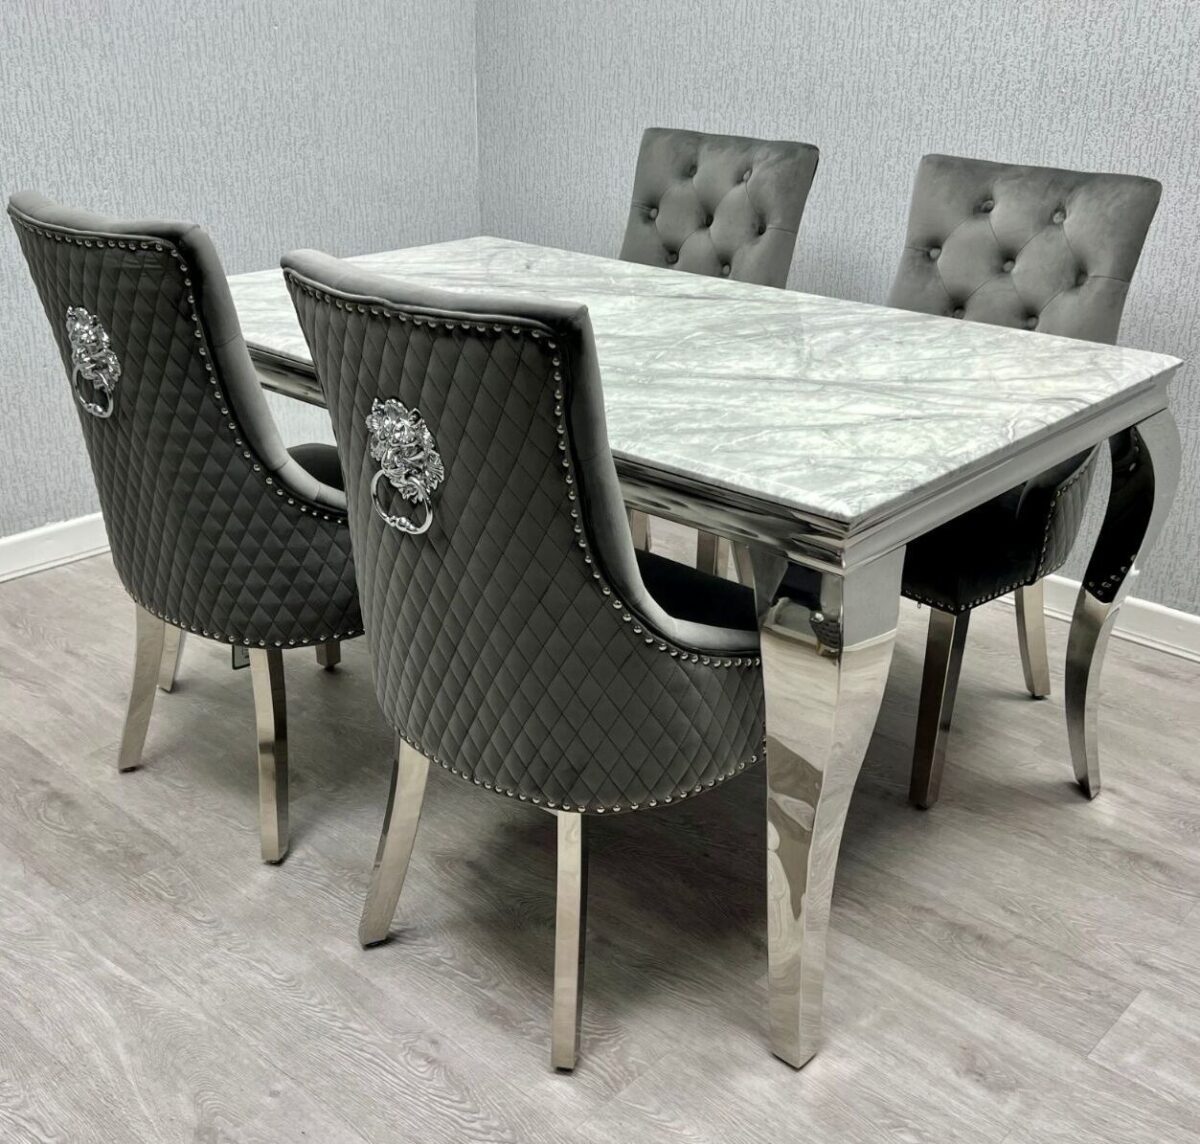 Marble dining table & chairs